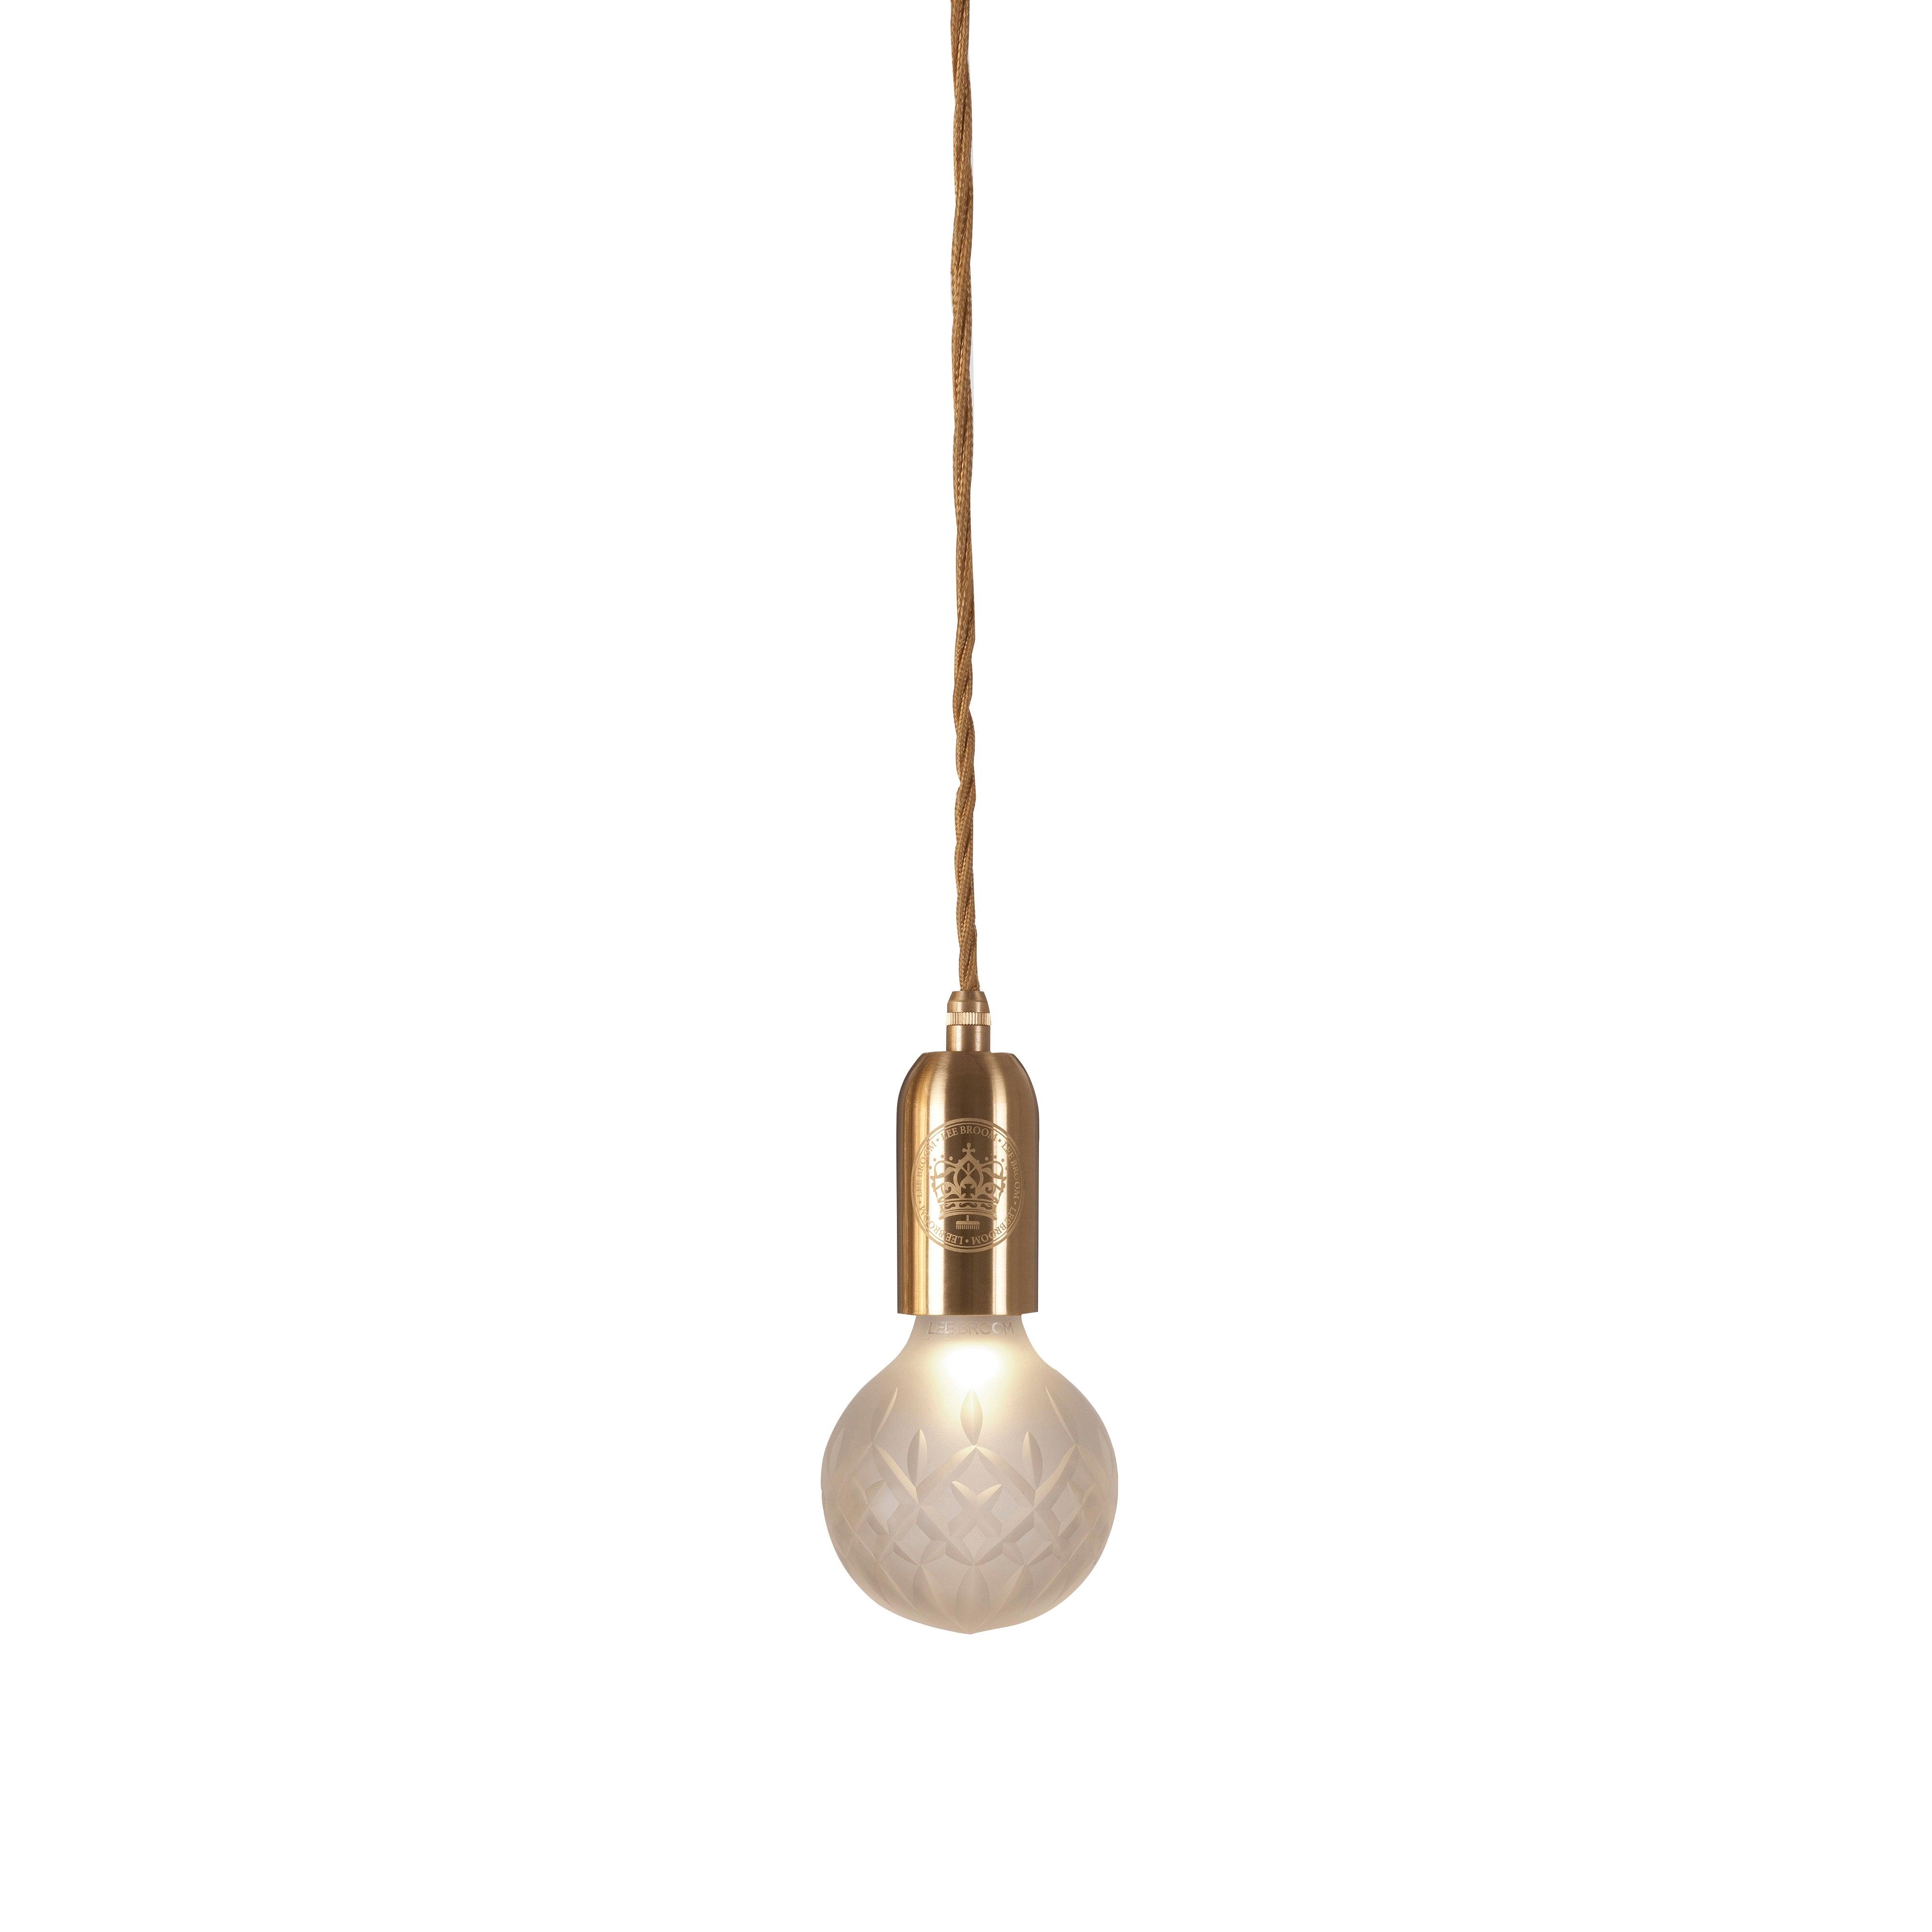 Crystal Bulb + Pendant: Bulb + Brushed Brass Fitting + Frosted